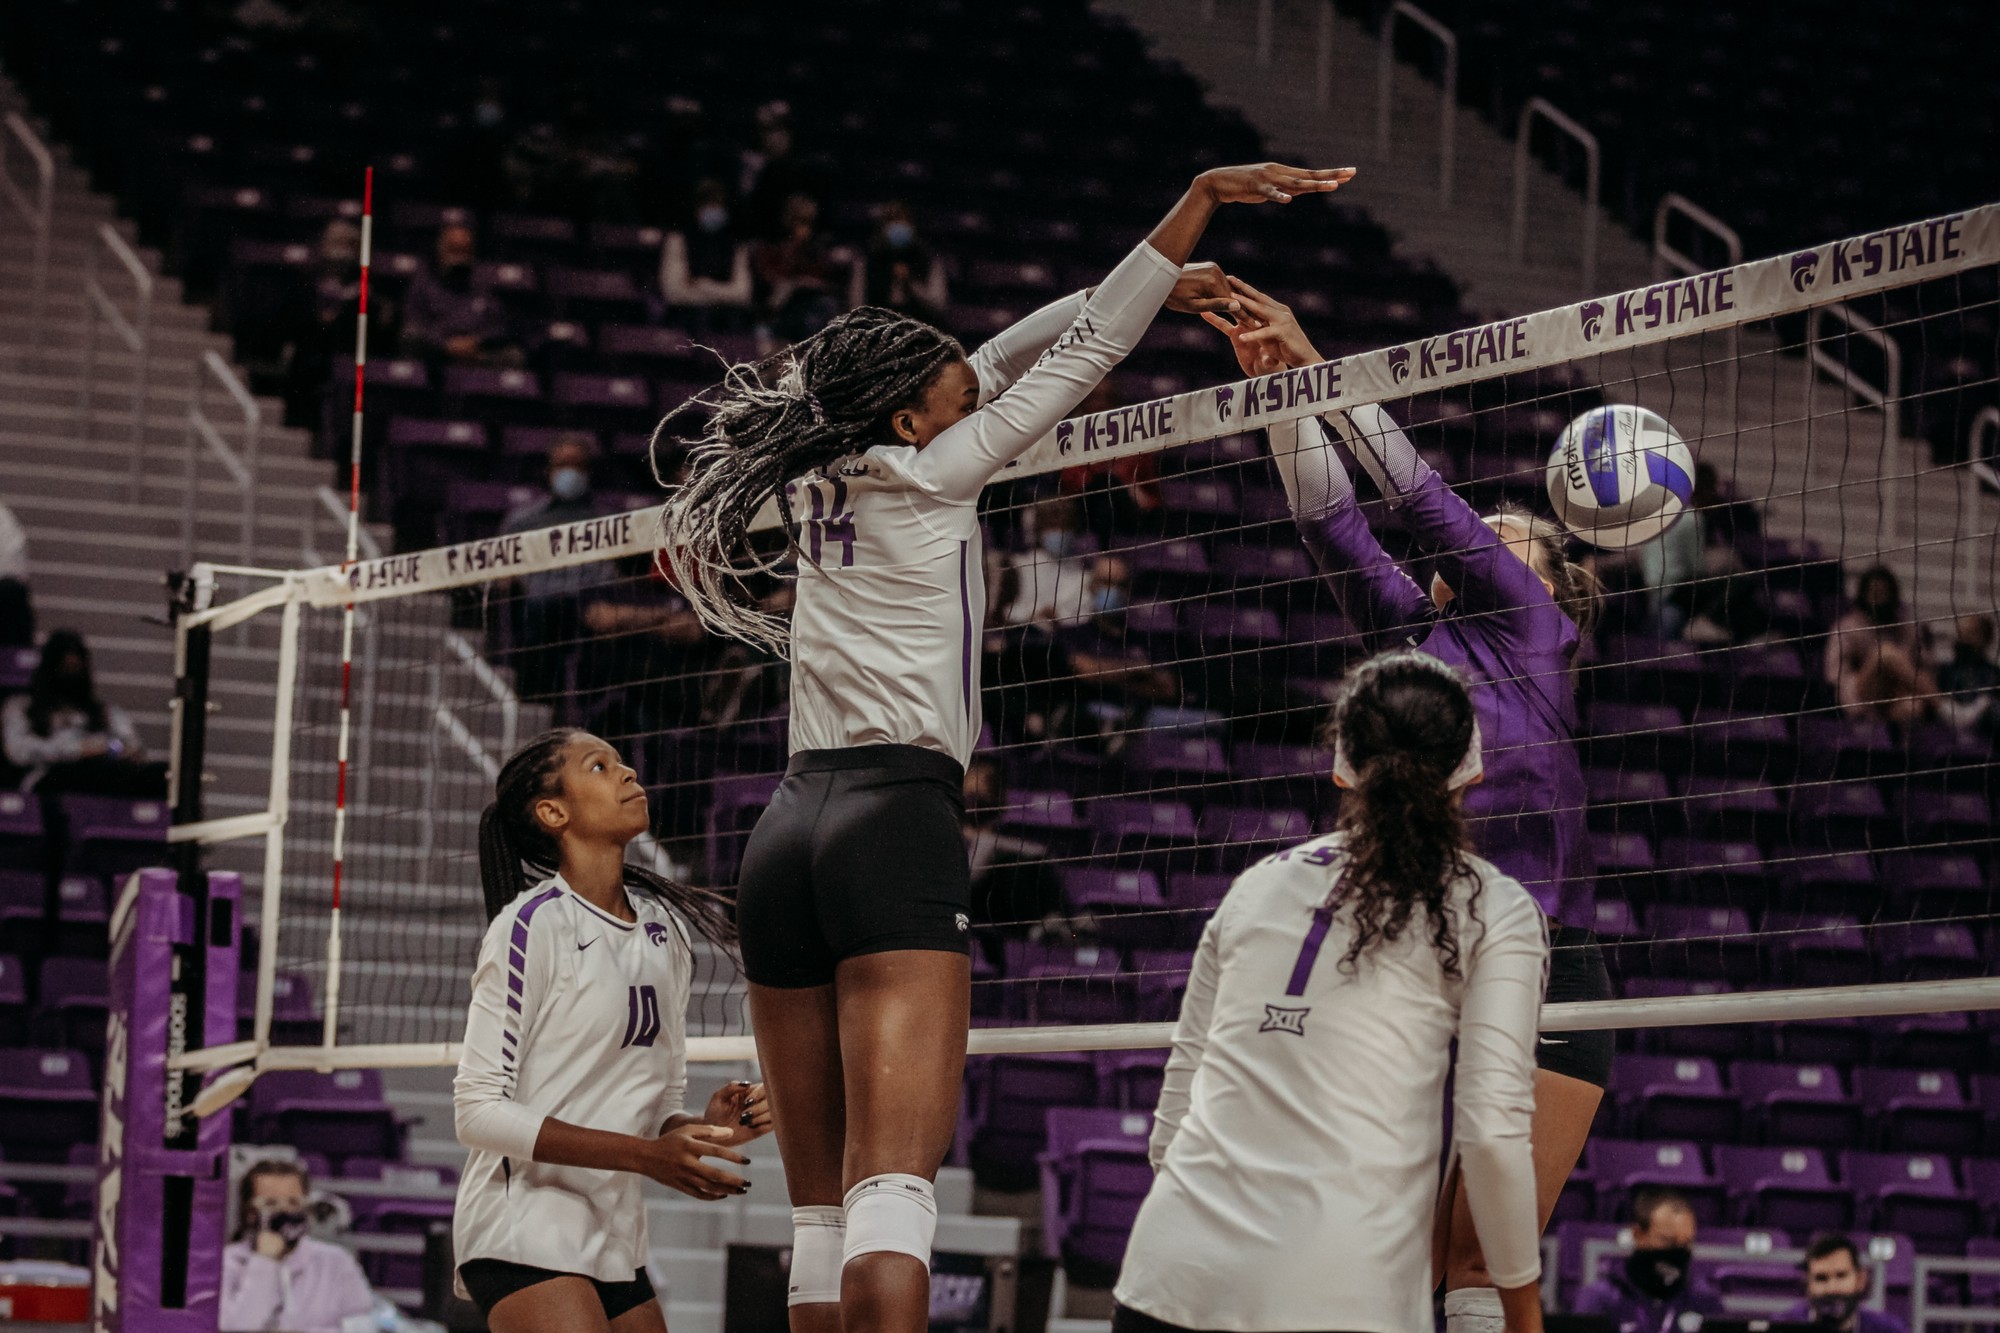 Volleyball trips for victory in the first game against TCU